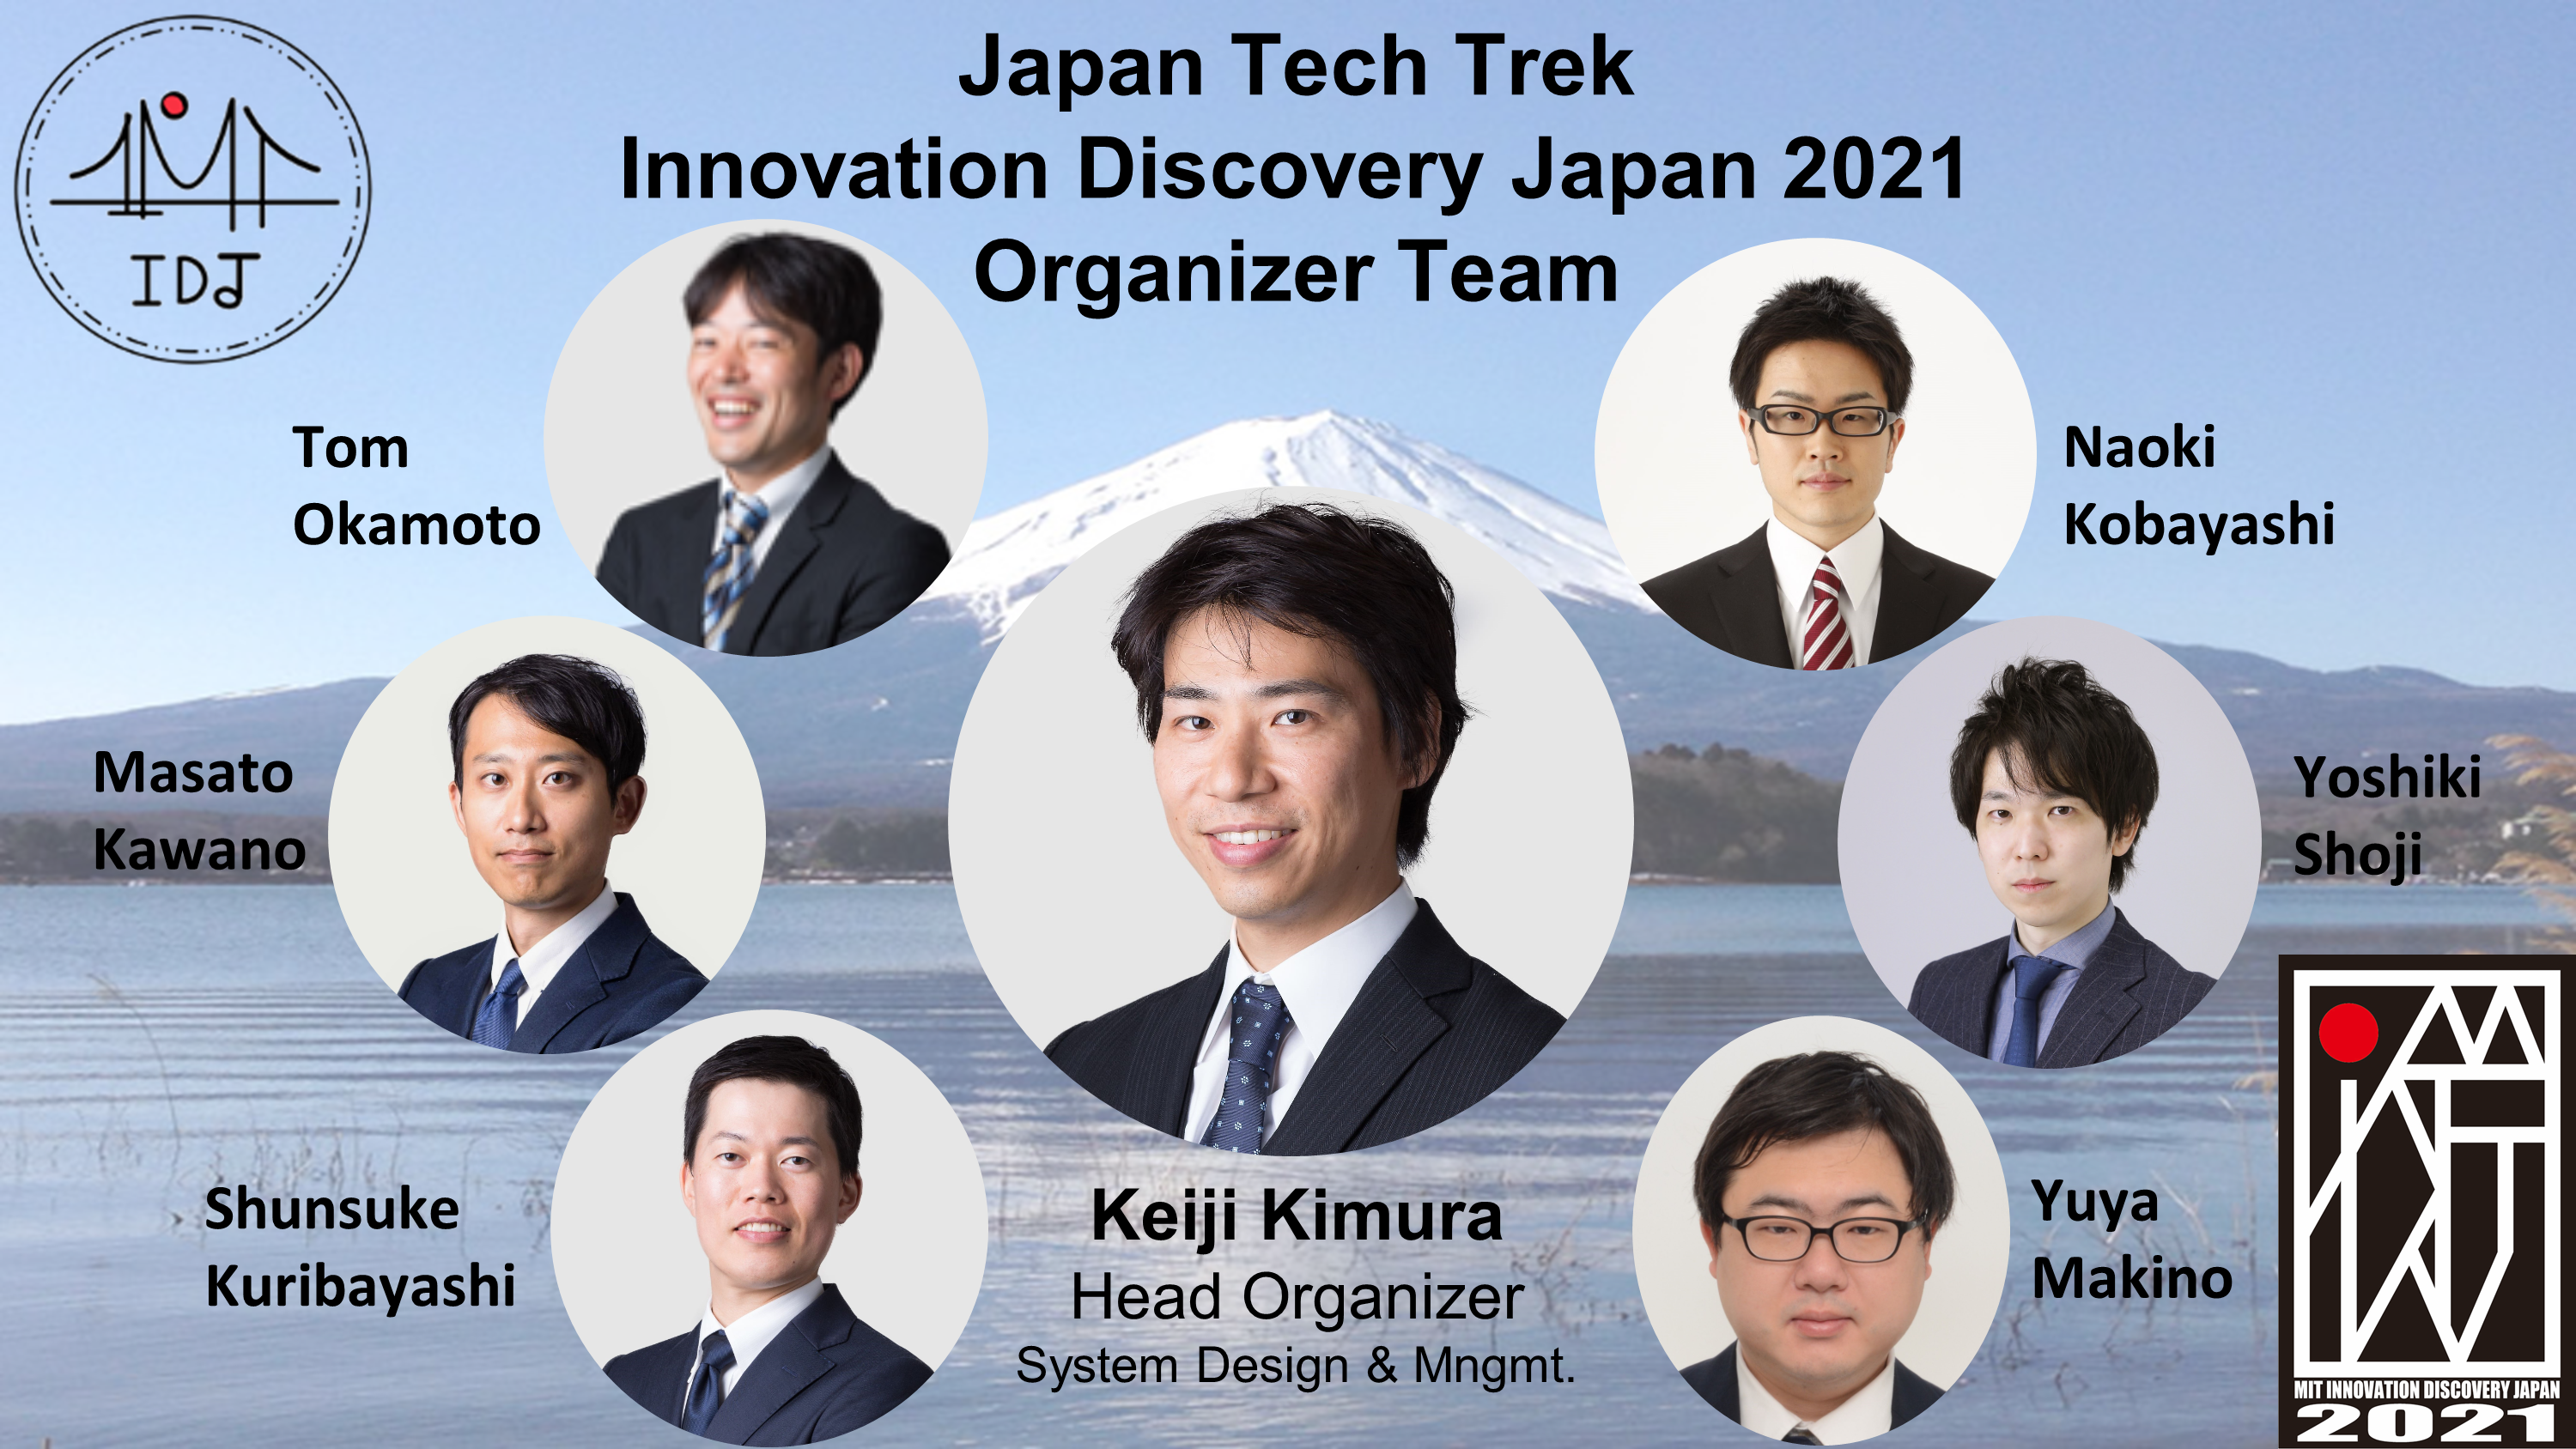 Banner featuring the leadership team of Innovation Discovery Japan, with Keiji Kimura in the center.